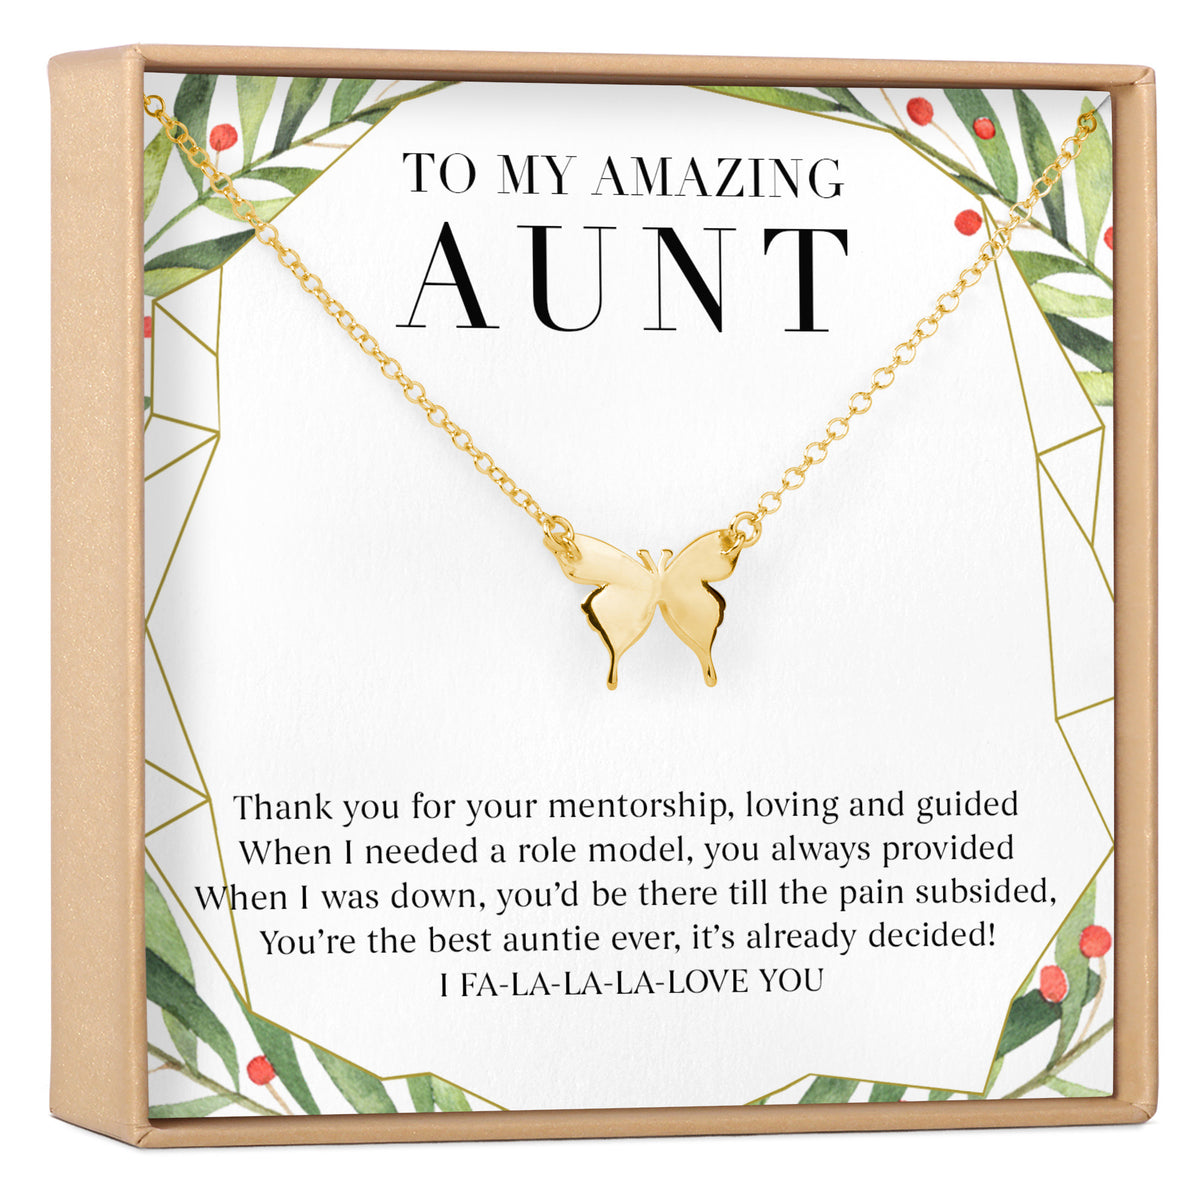 Christmas Gift for Aunt: Present, Necklace, Jewelry, Xmas Gift, Holiday Gift Idea, Auntie, Aunt Gift, Aunt Jewelry, Best Aunt, Multiple Styles